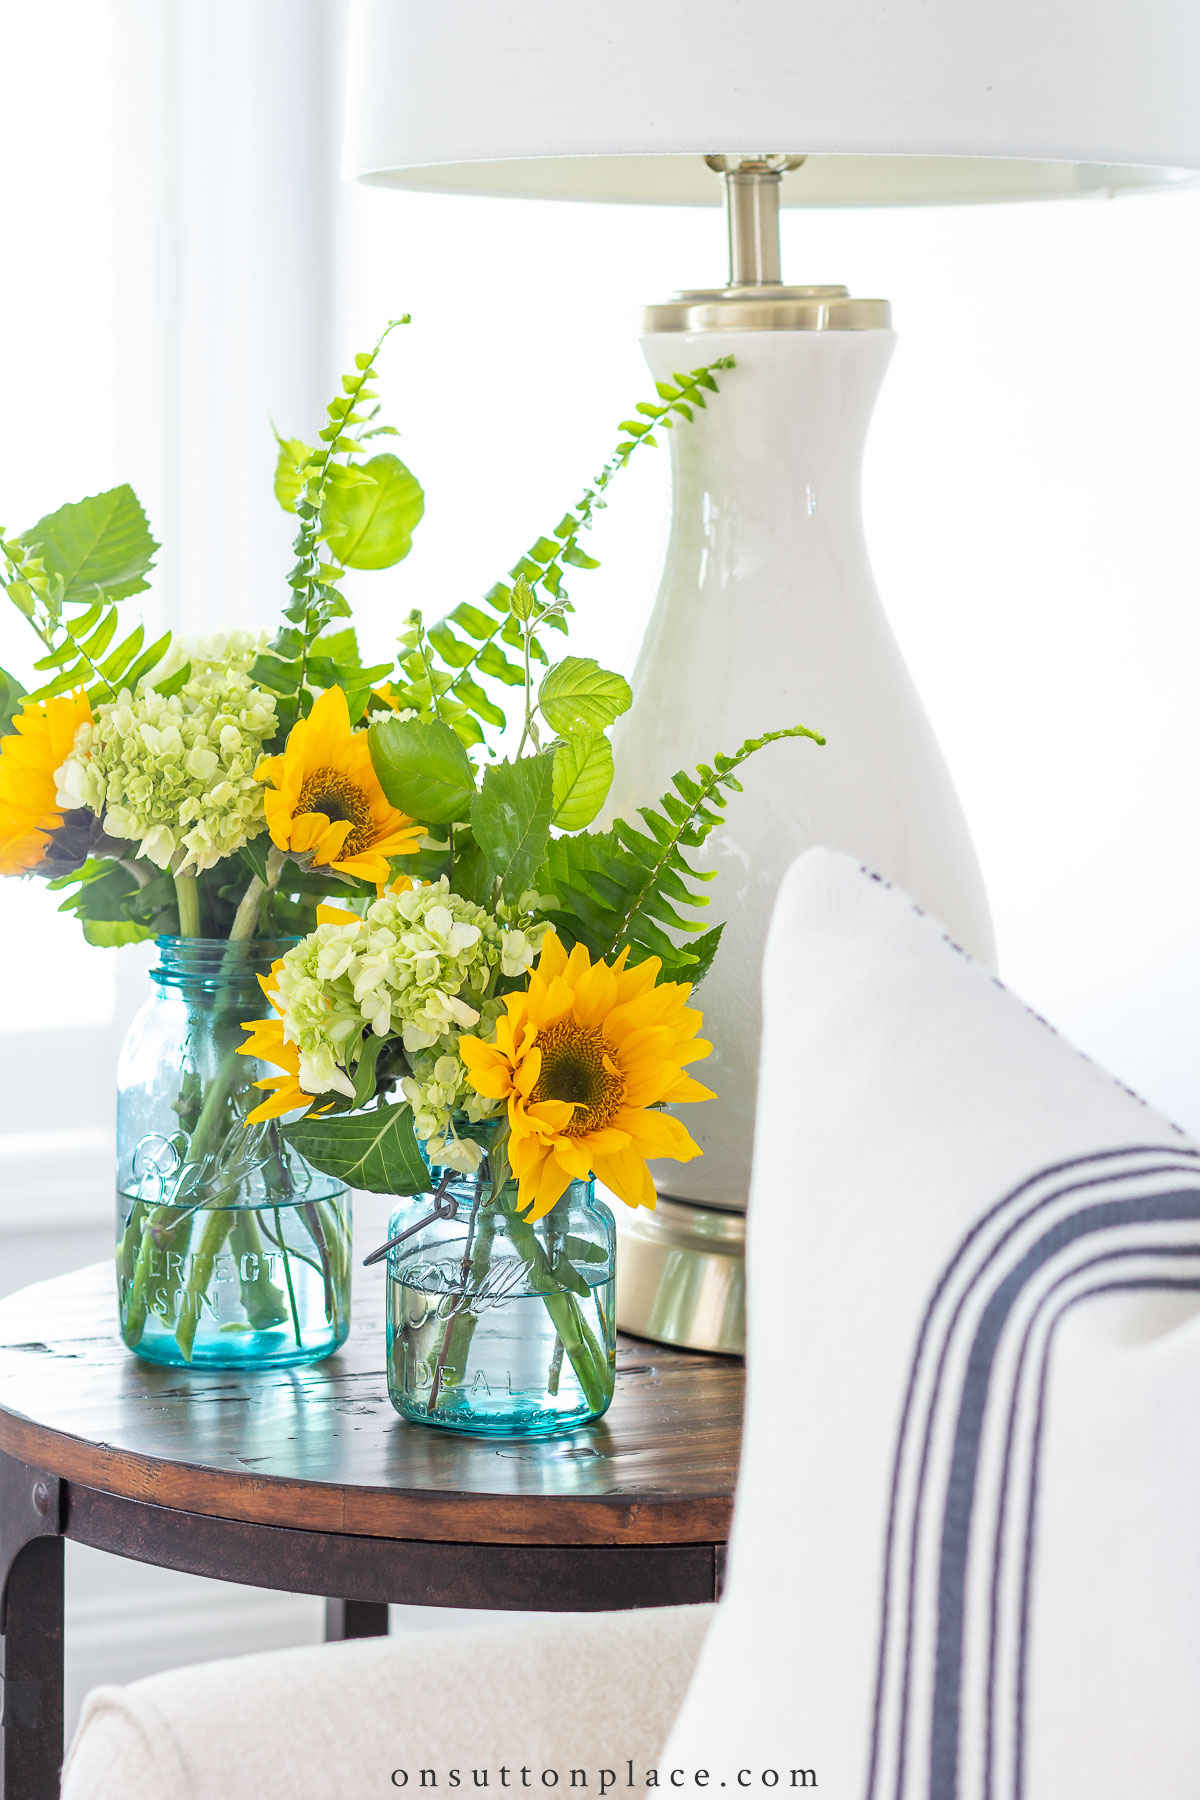 https://www.onsuttonplace.com/wp-content/uploads/2019/02/sunflowers-in-mason-jars-on-end-table.jpg